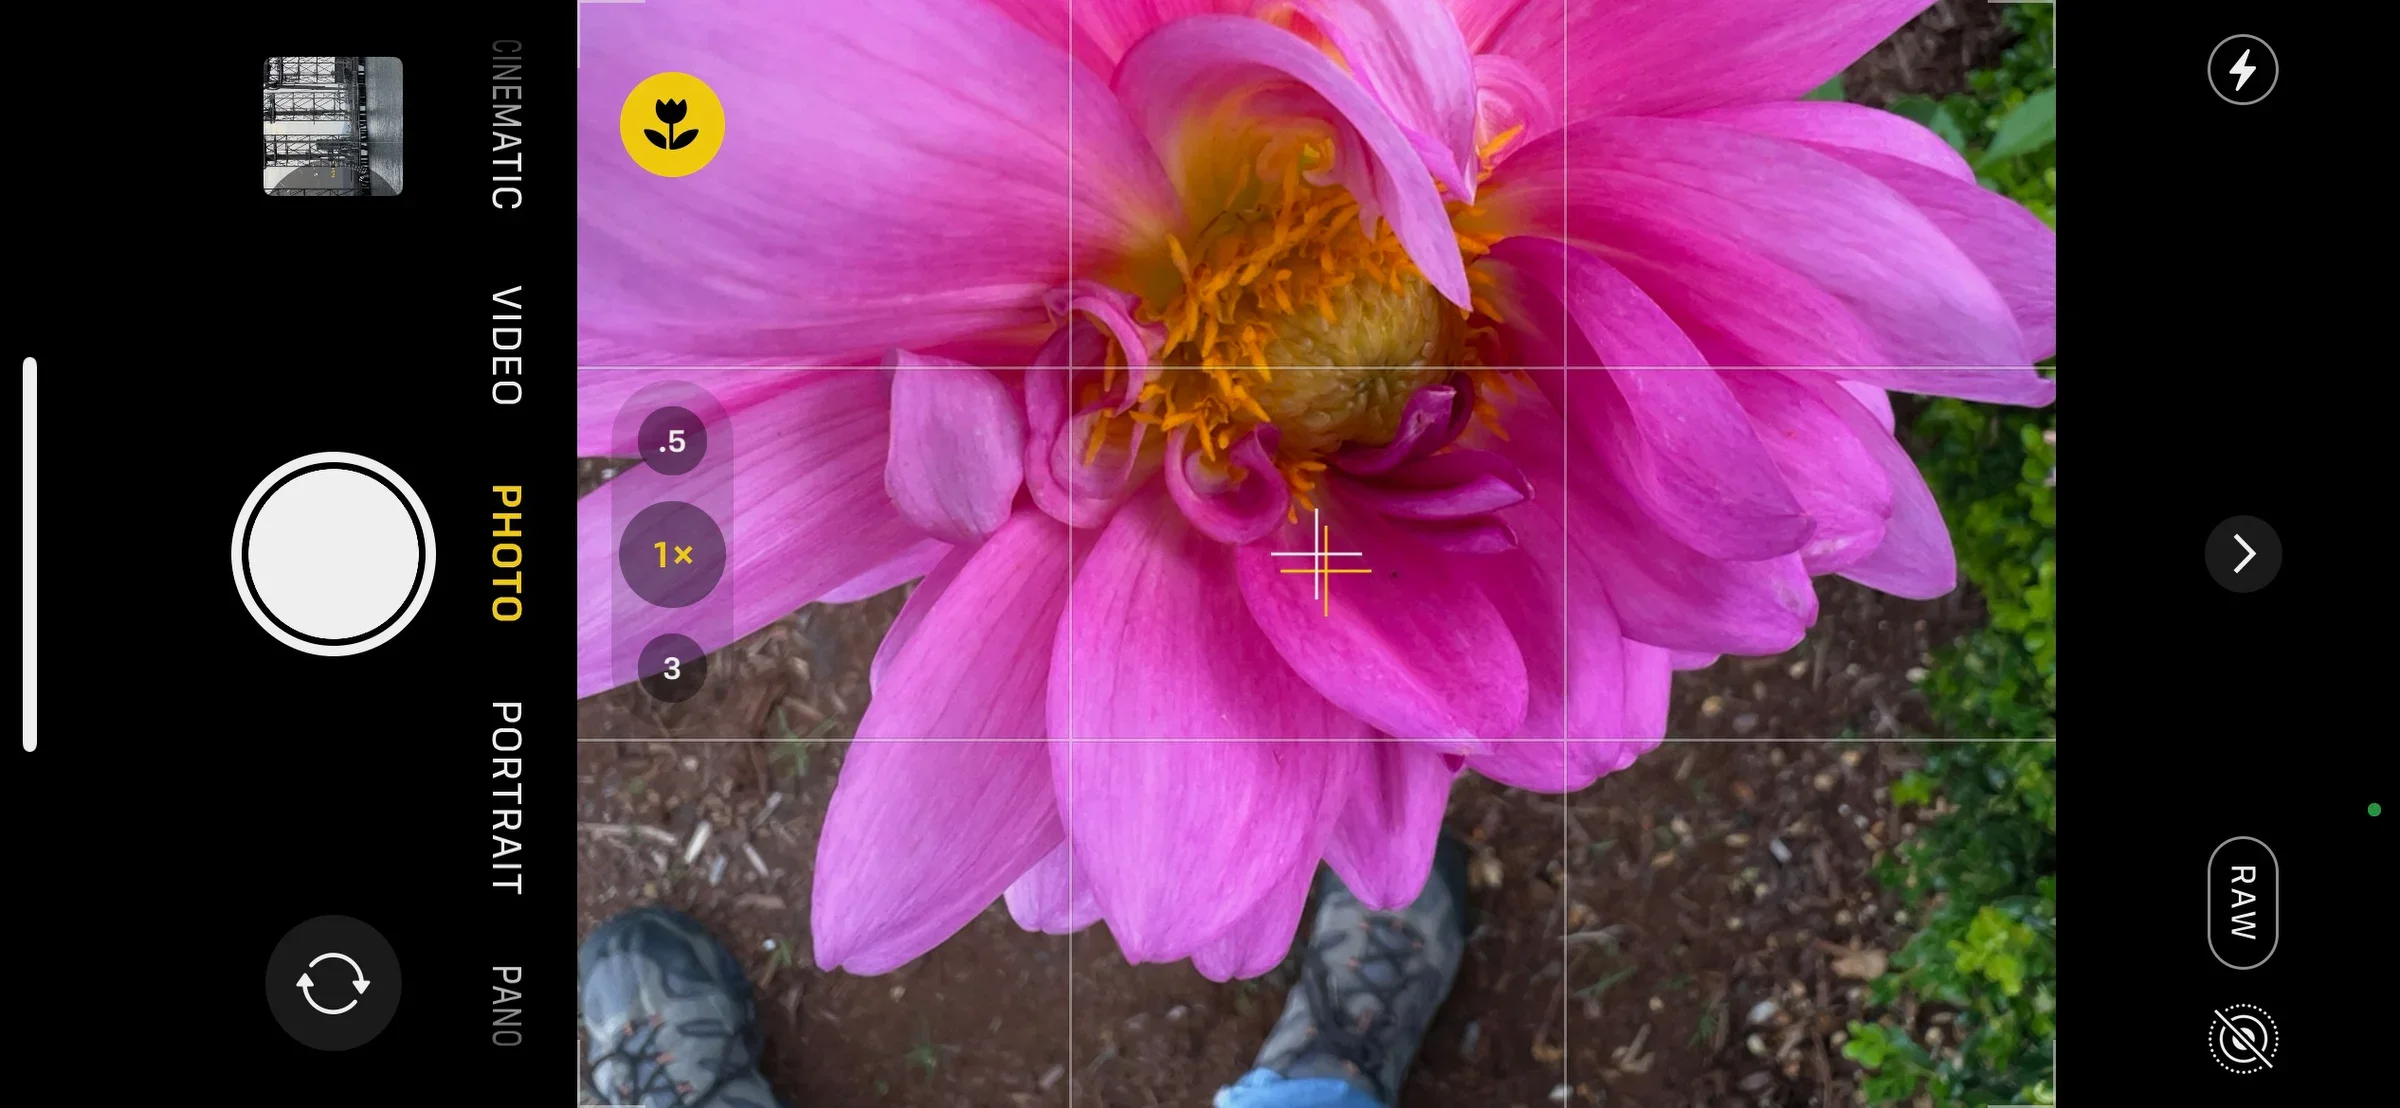 Your smartphone's camera has great hidden features - here's how to find them